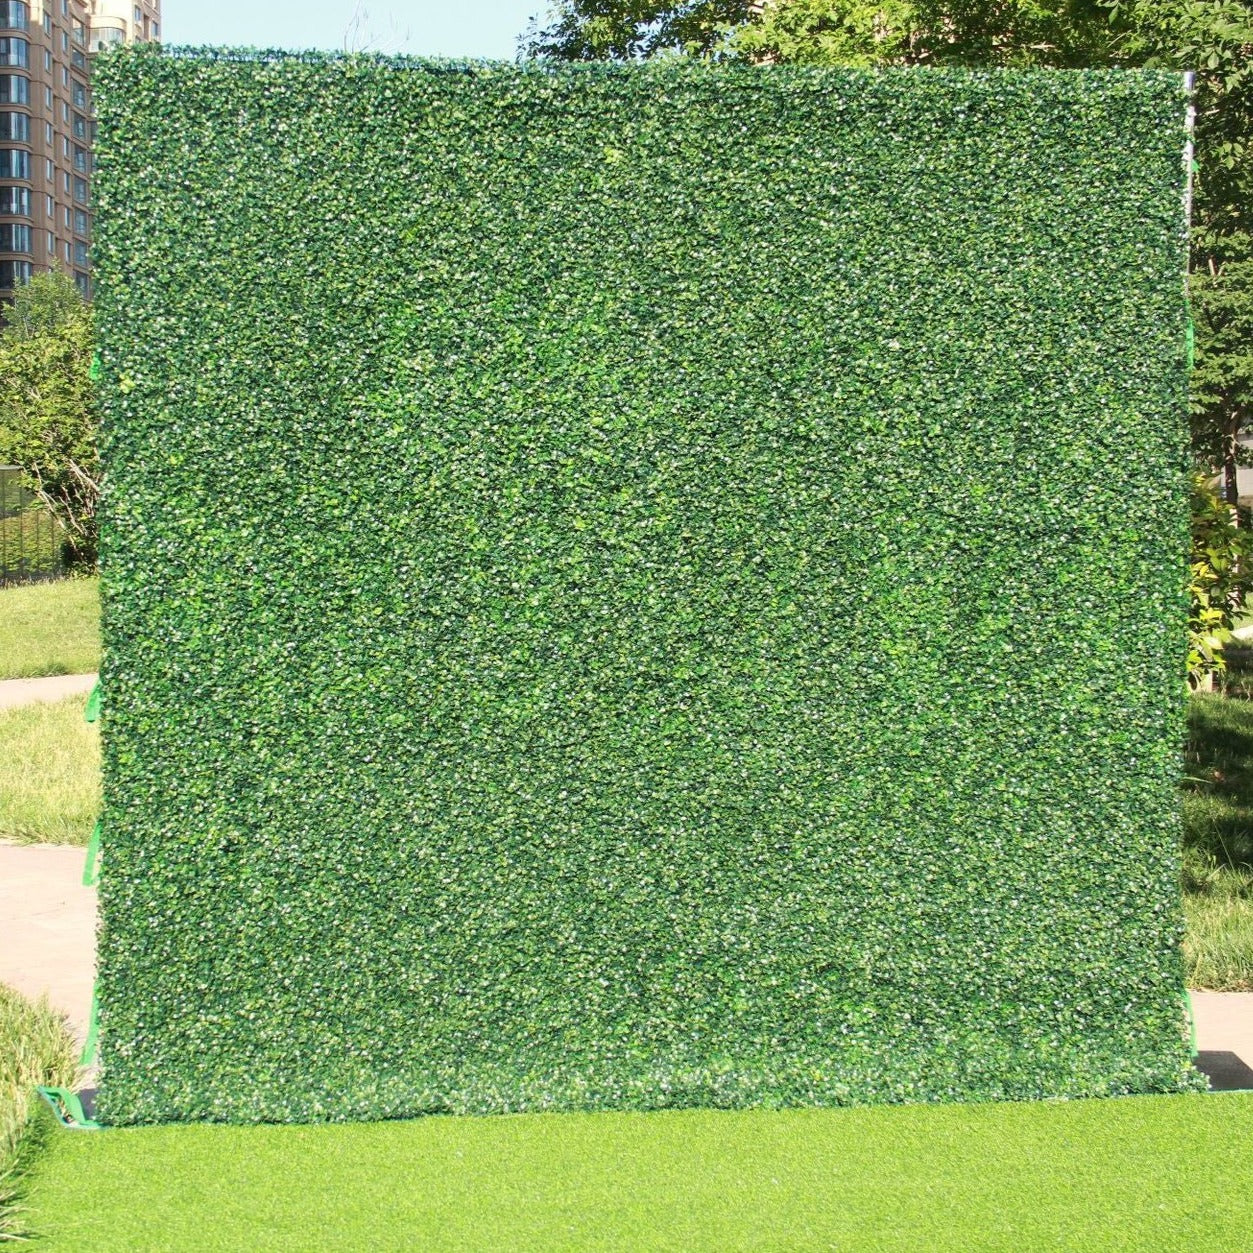 The milan green wall looks full of life.